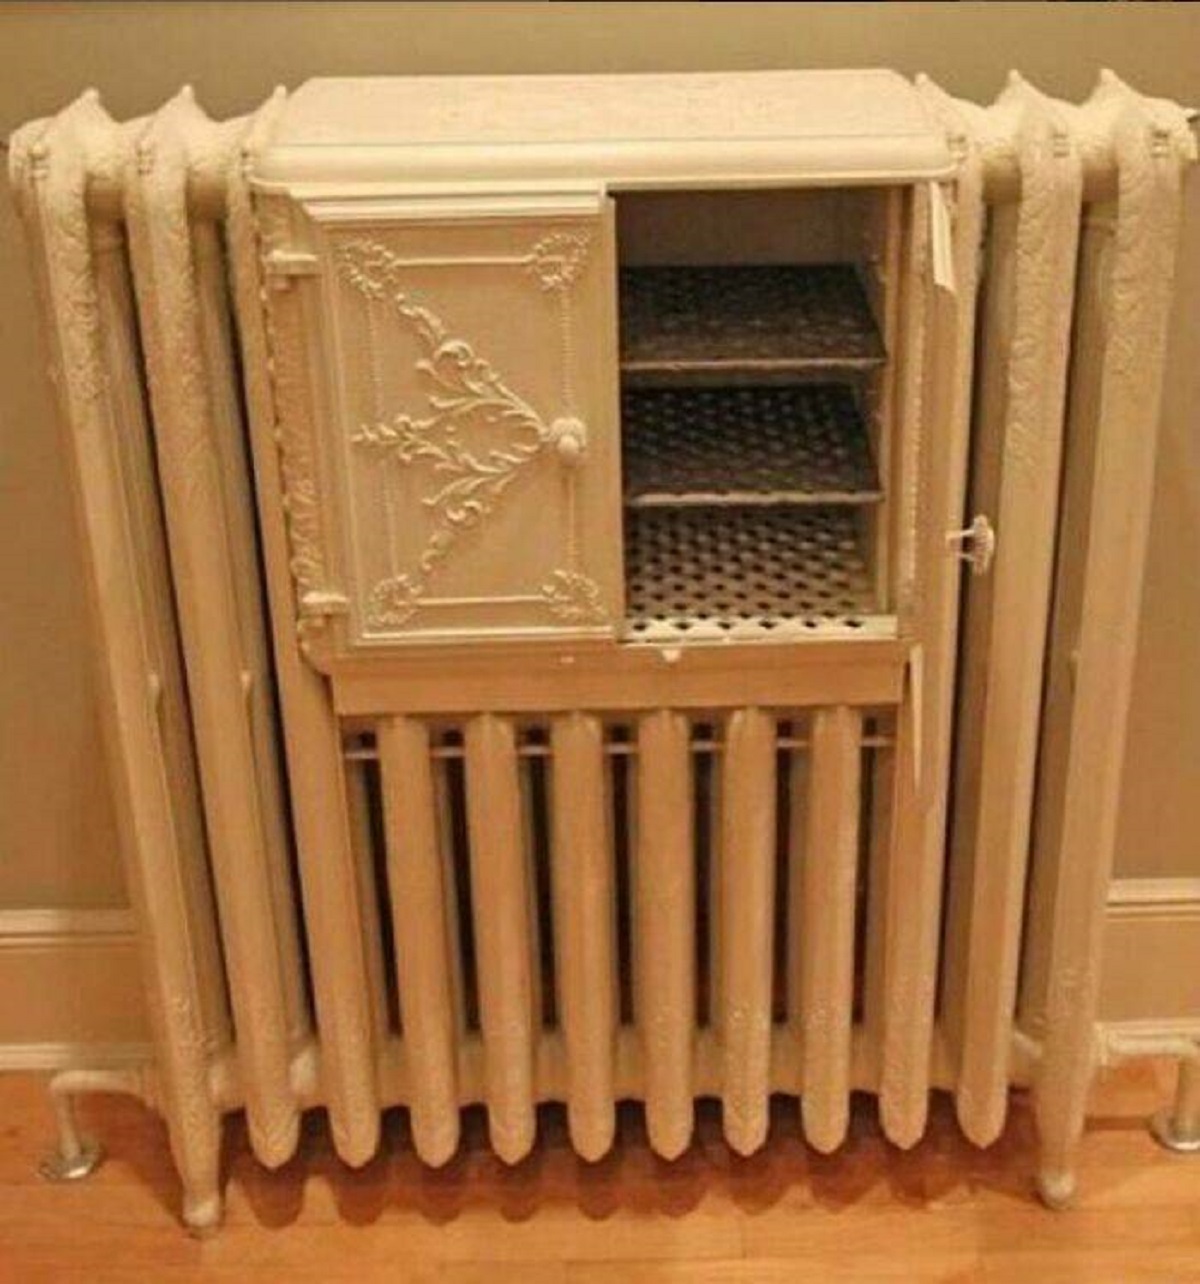 "A Late 19th-Century Victorian Radiator With A Built-In Warming Oven Is A Charming Relic From A Bygone Era"